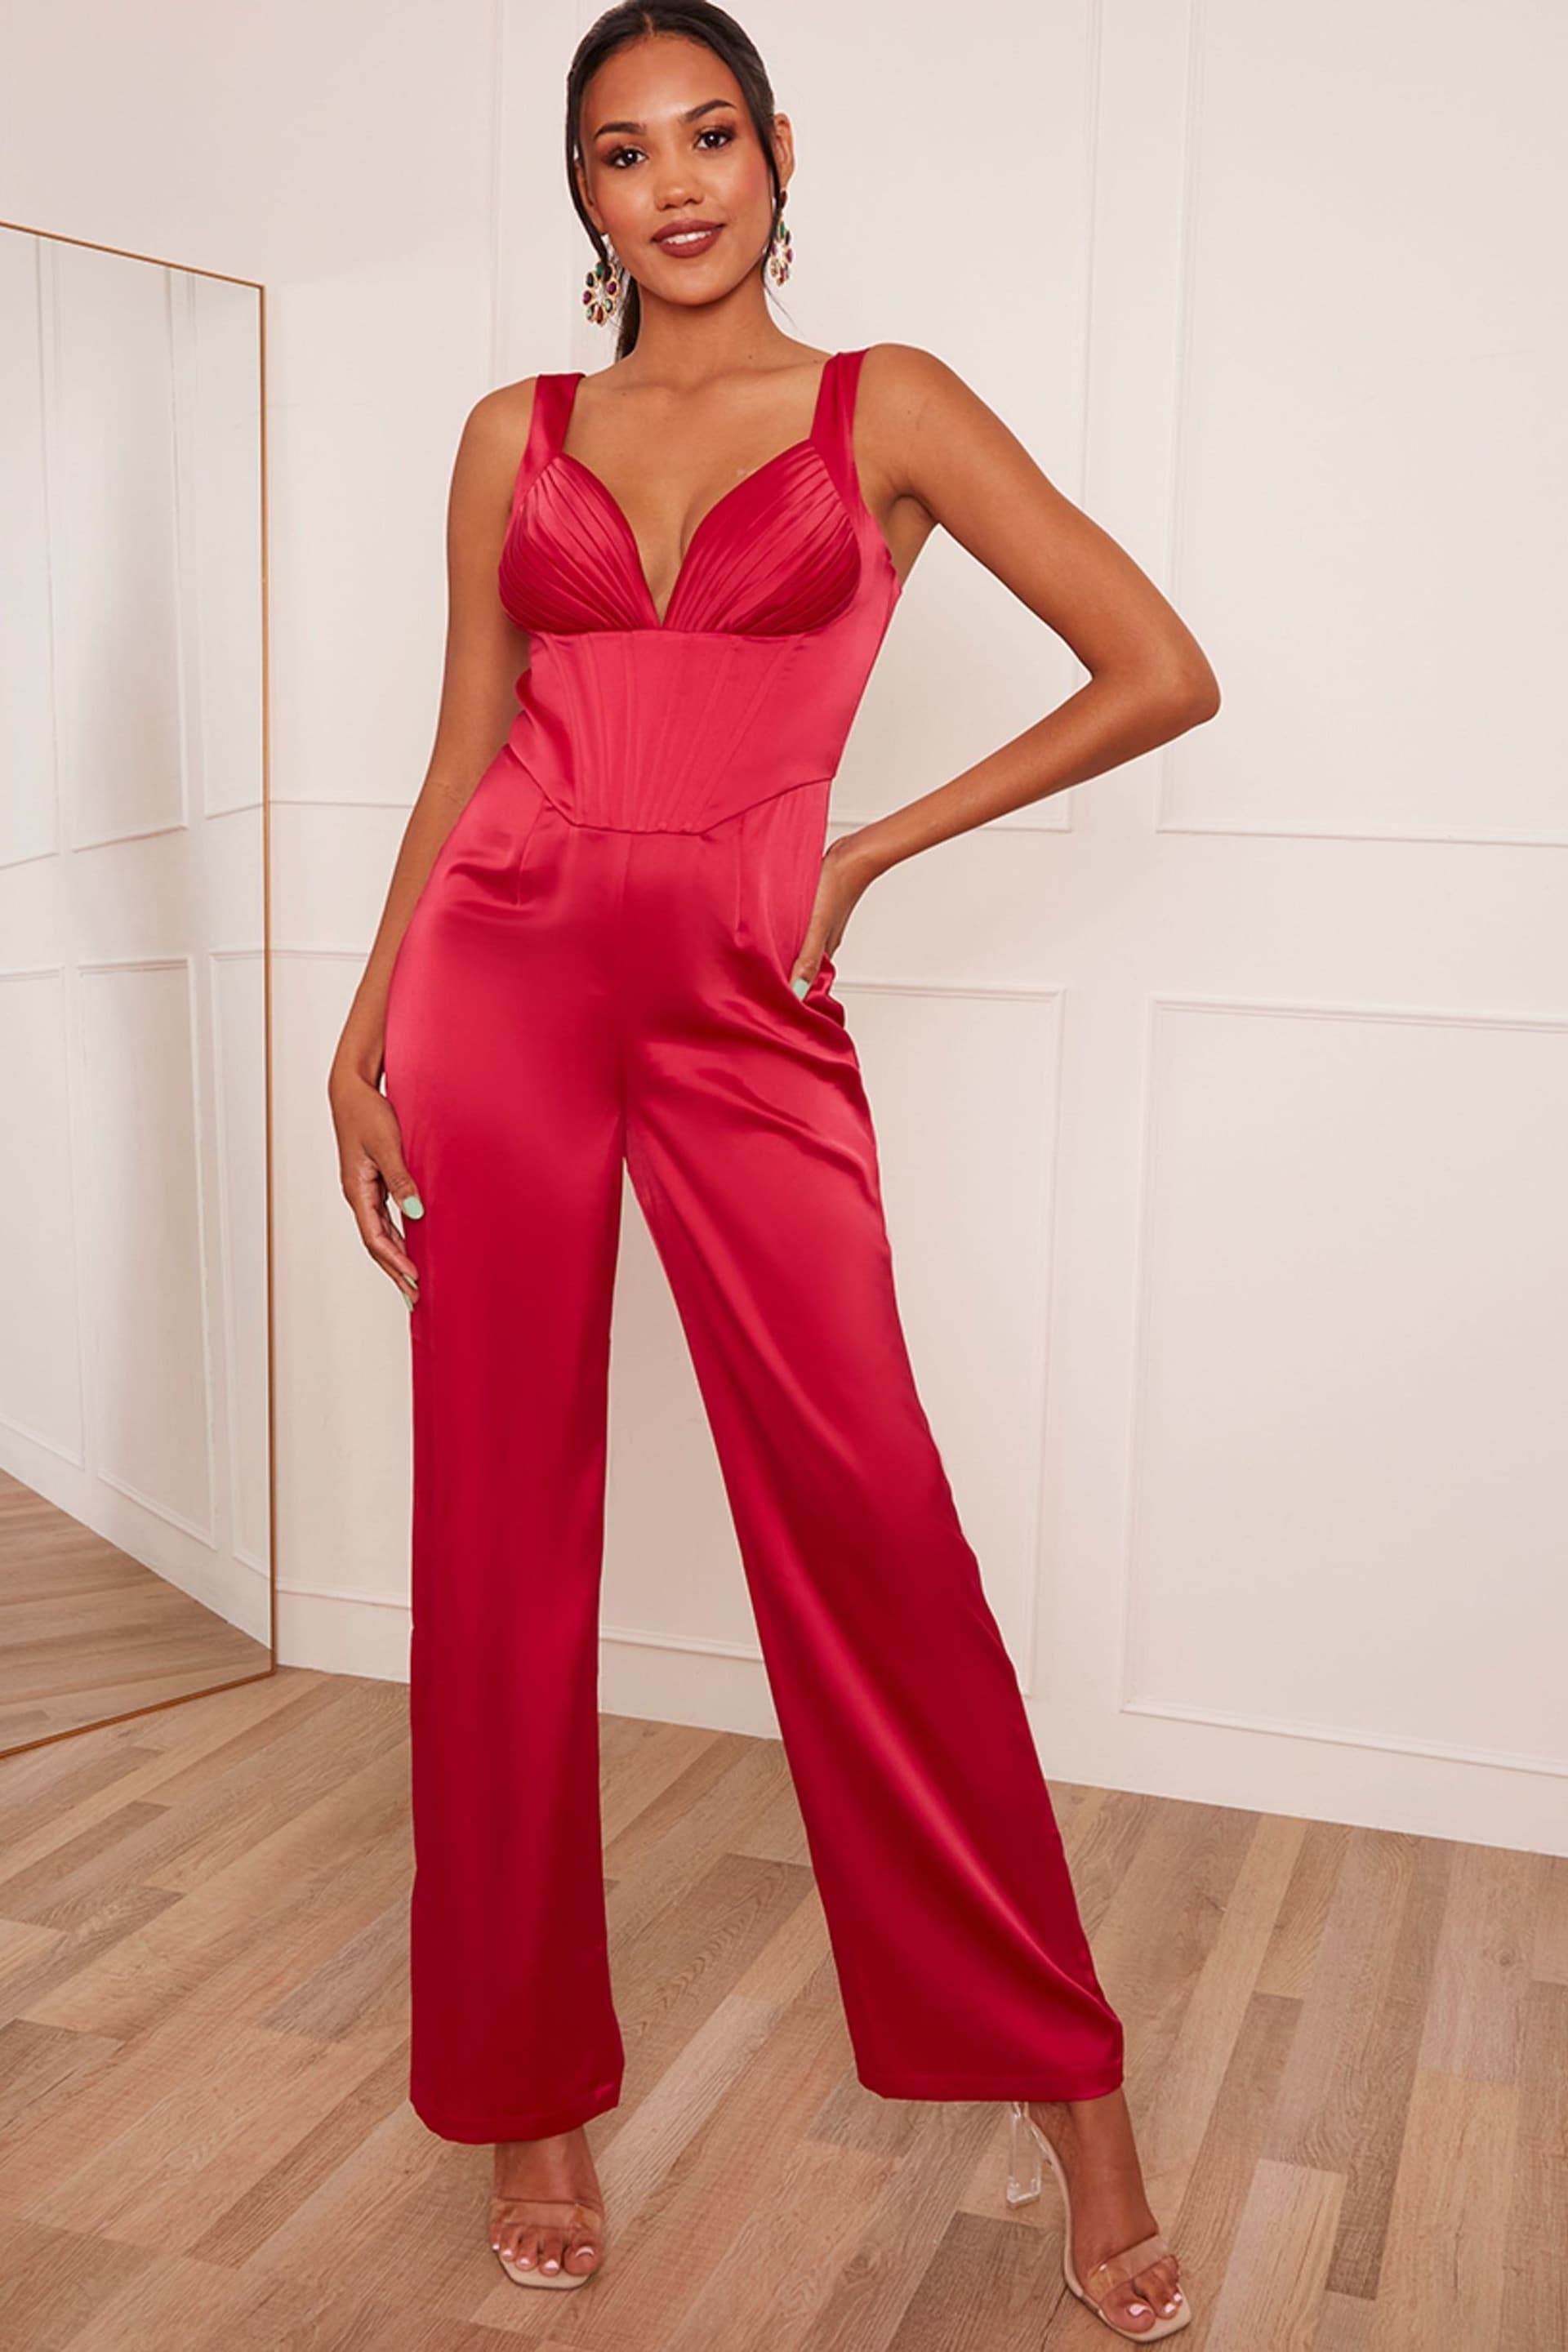 Chi Chi London Red Corset Style Jumpsuit - Image 1 of 3